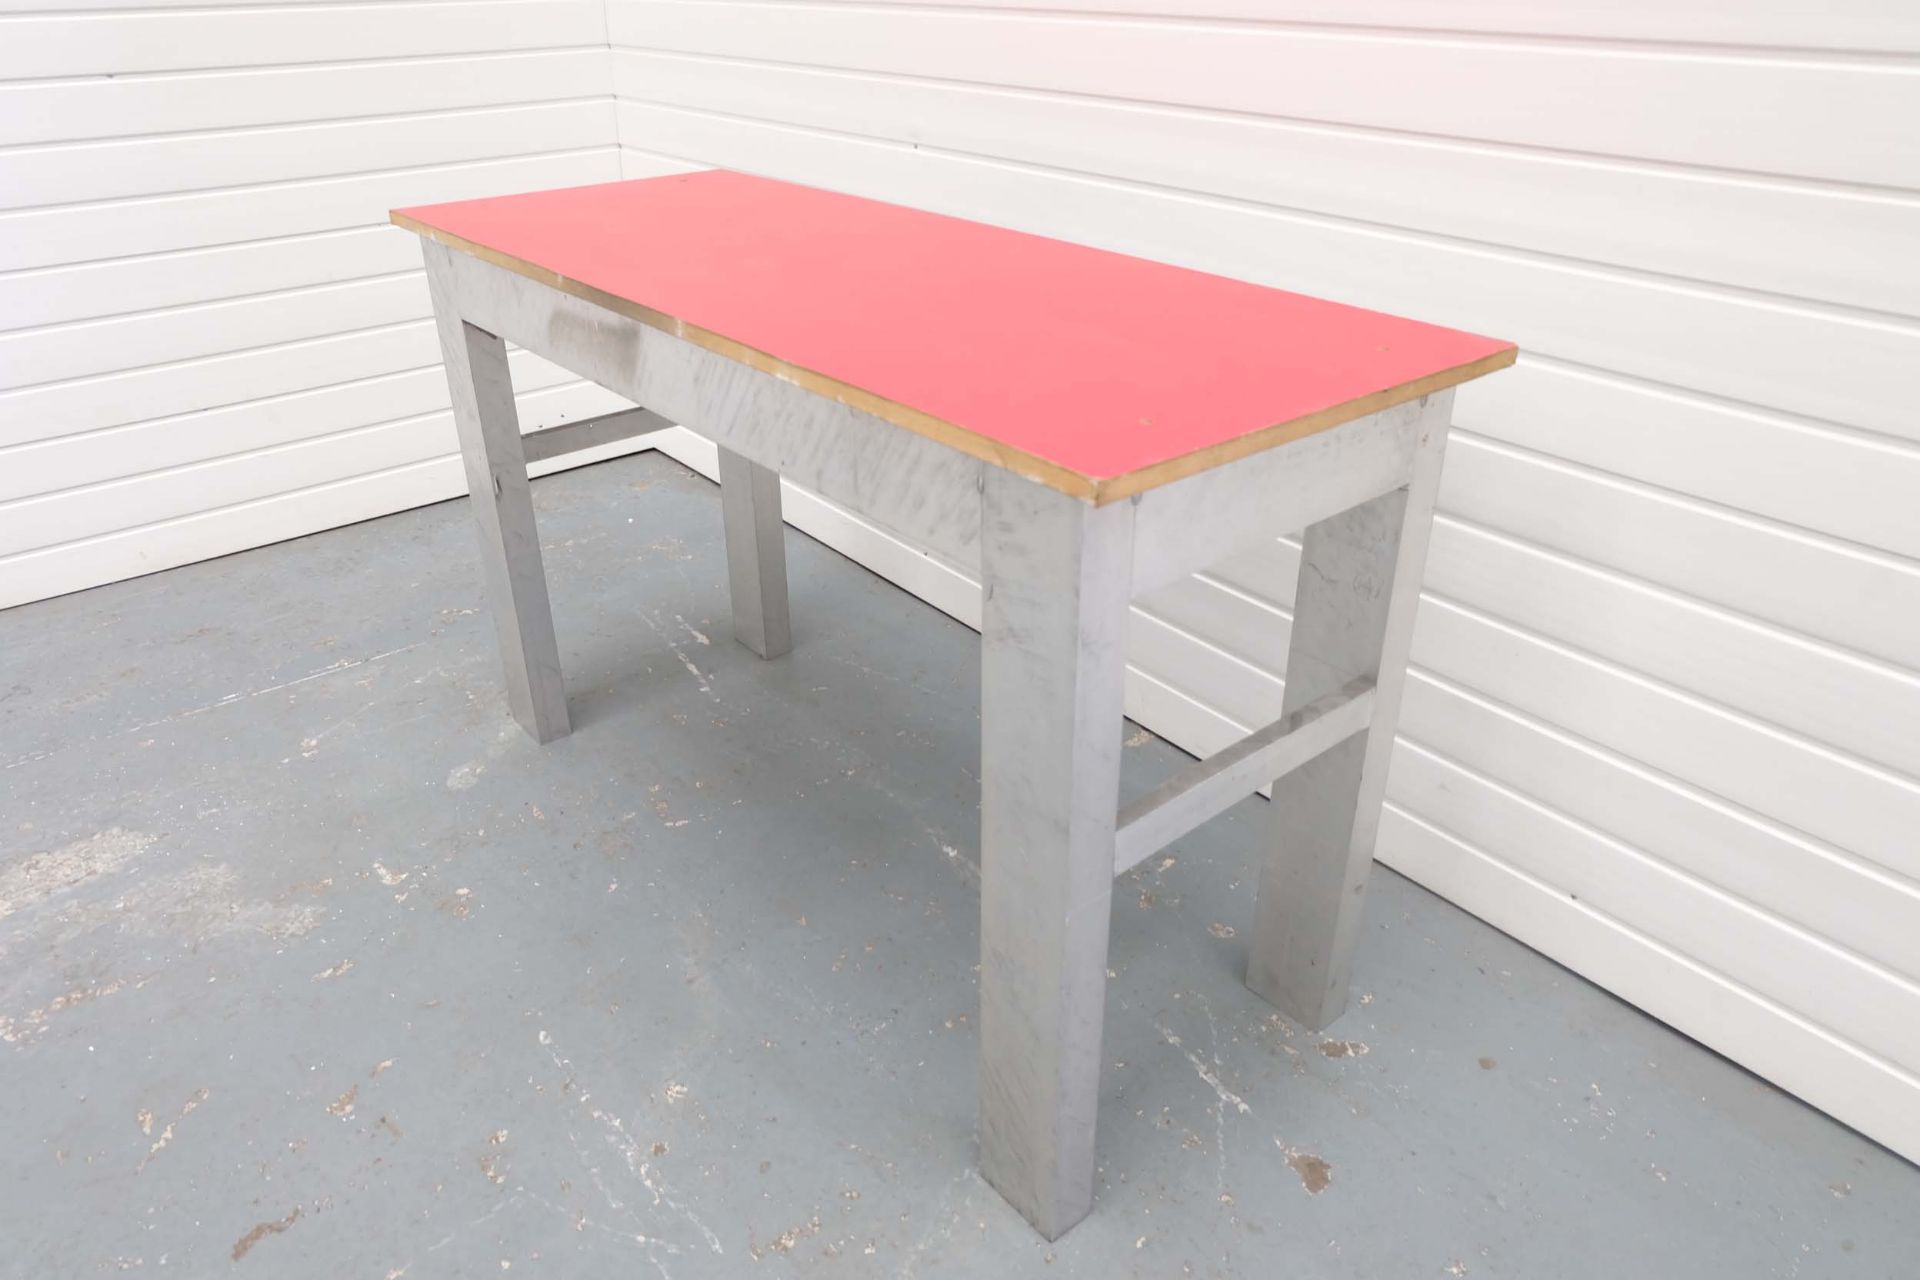 Aluminium Workbench With Wood Top. Size: 48" x 18" x 30" High. - Image 2 of 3